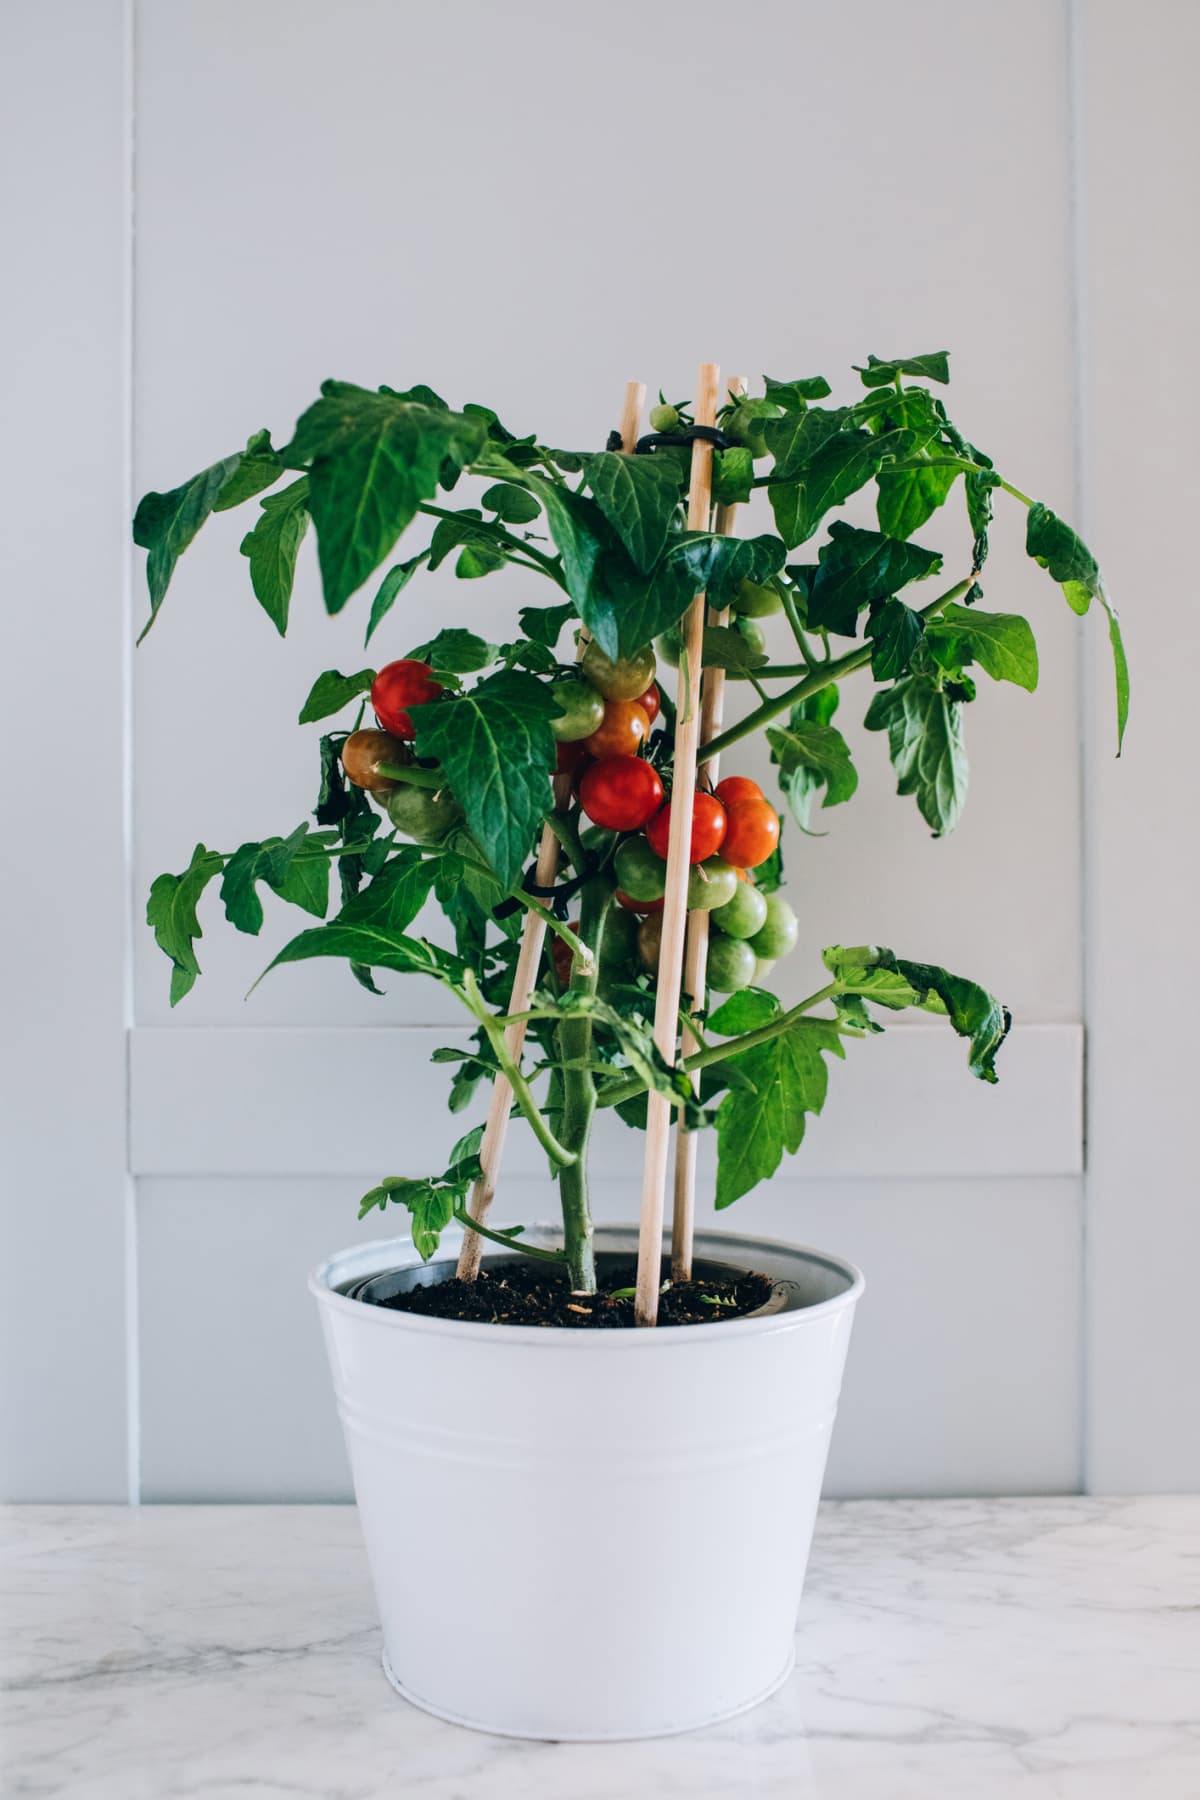 A cherry tomato plant with wooden support stakes